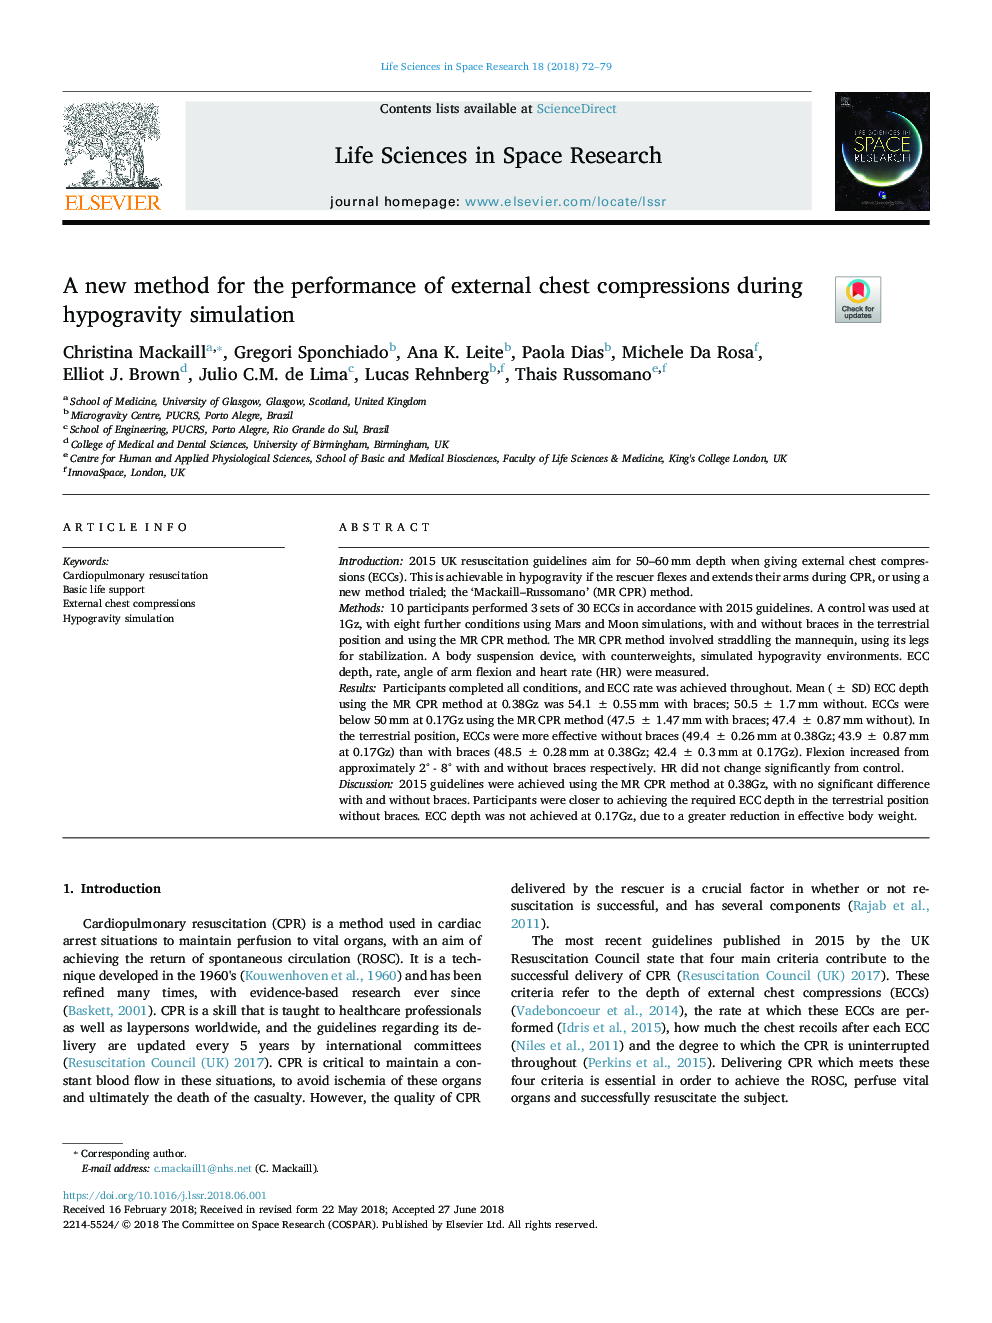 A new method for the performance of external chest compressions during hypogravity simulation